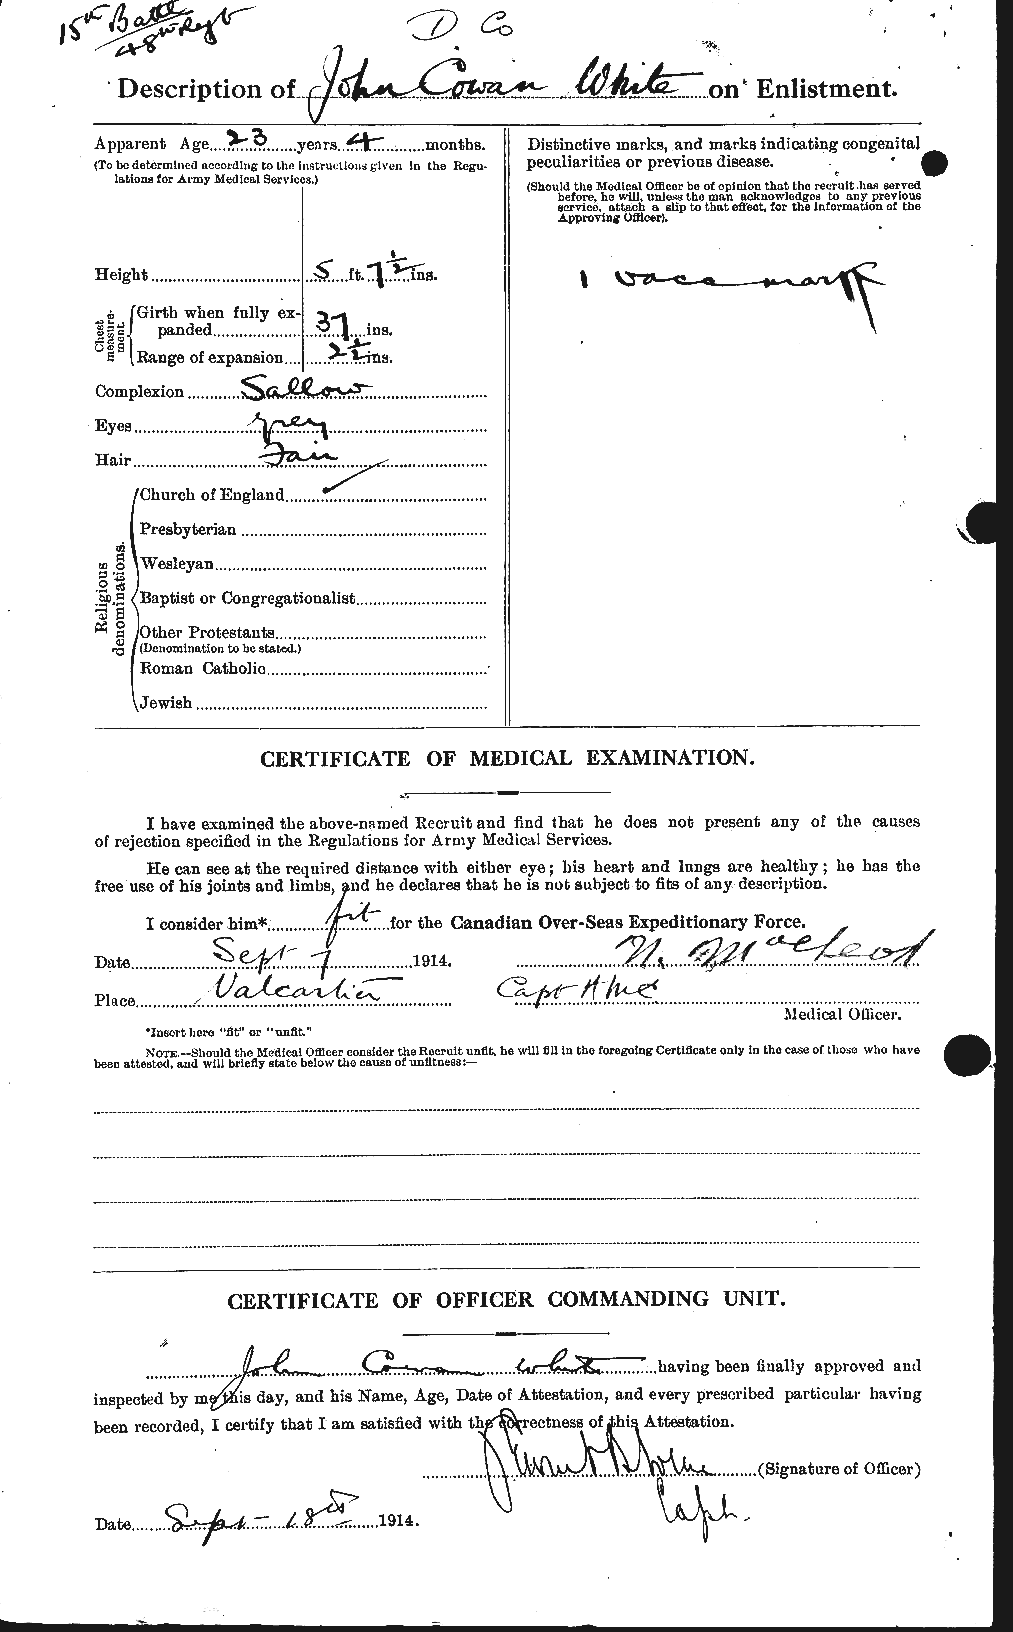 Personnel Records of the First World War - CEF 671548b